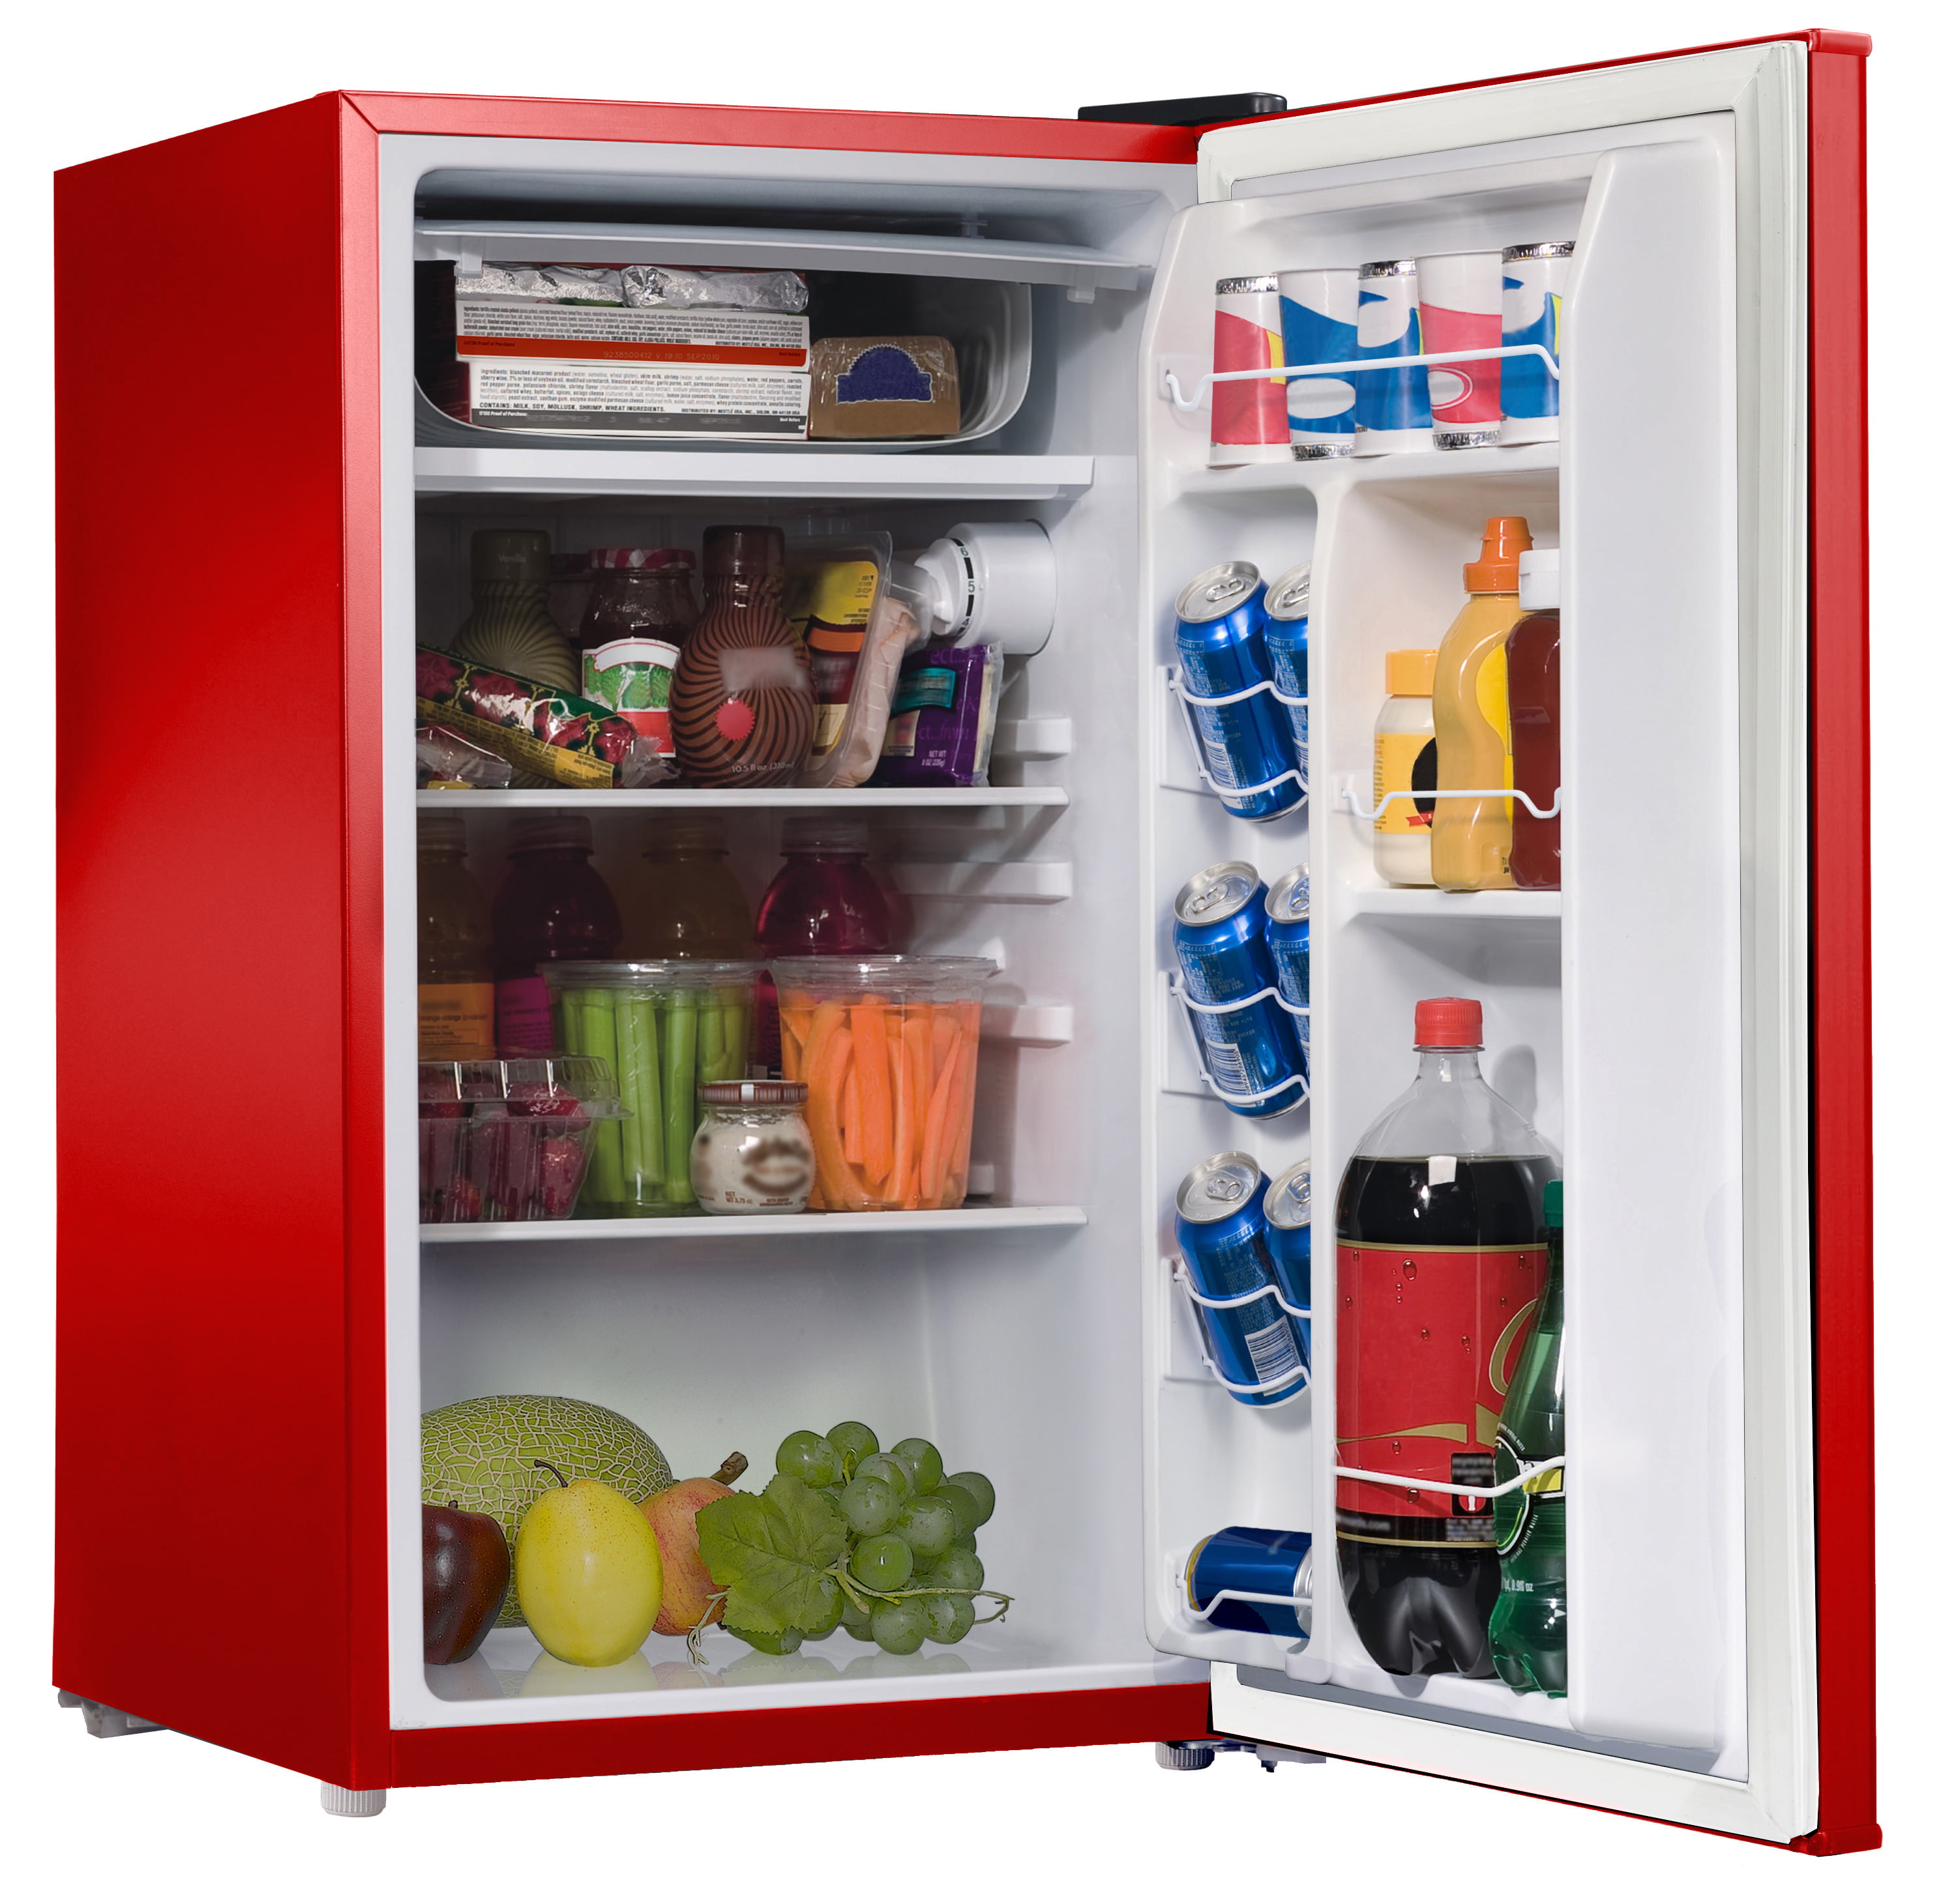 GL35S5 by Galanz - Galanz 3.5 Cu Ft Compact Refrigerator in